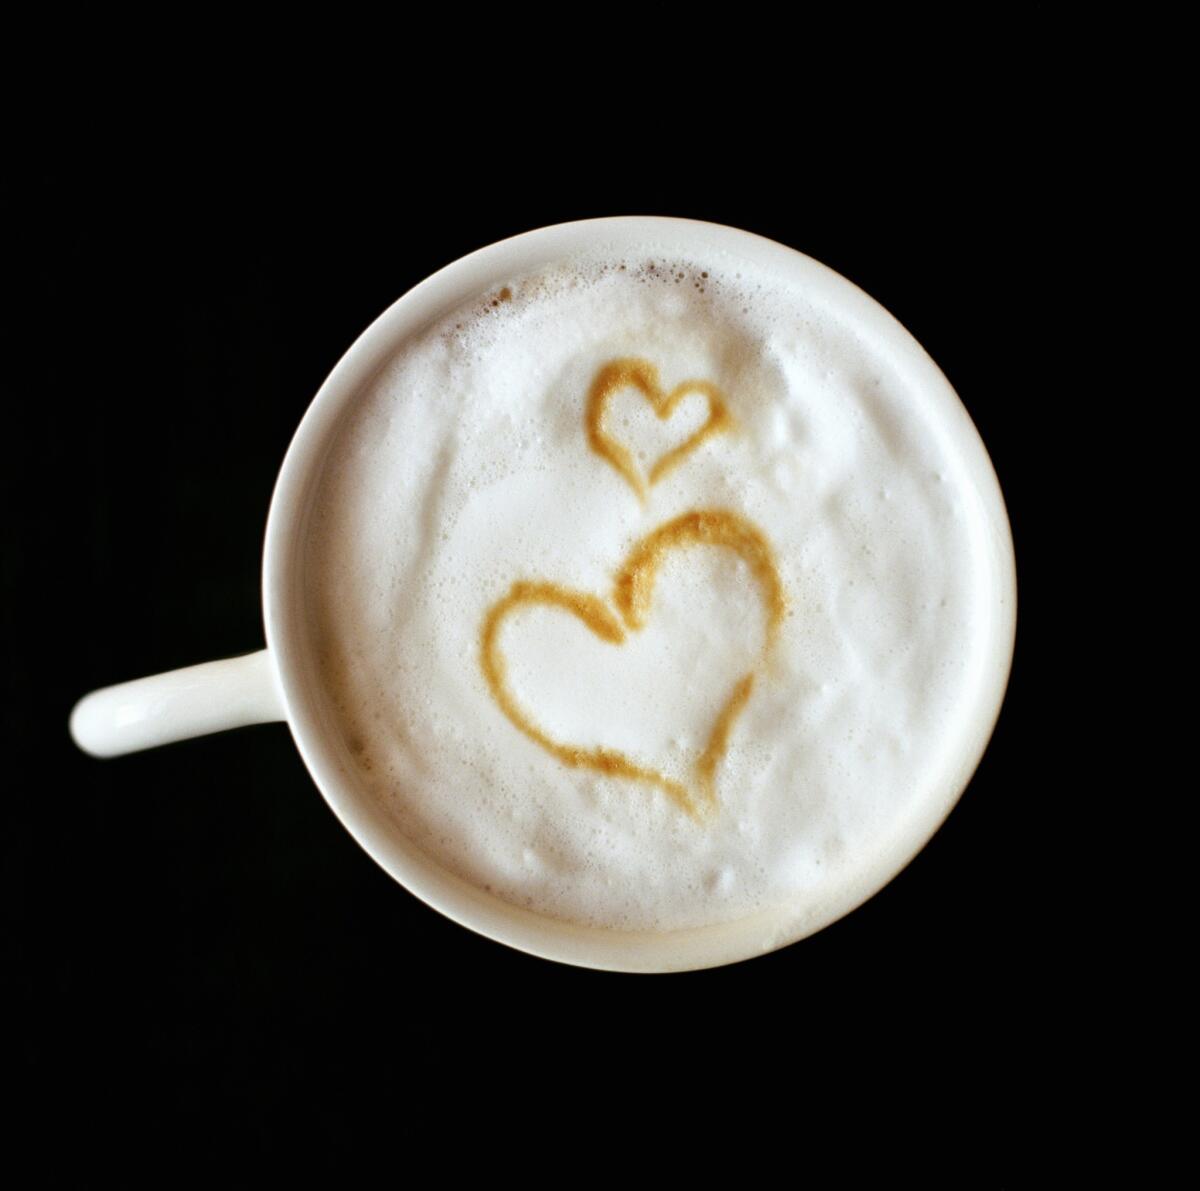 Share your best and worst Valentine's Day stories. At restaurant STK, it was a proposal at the bottom of a cup of coffee.